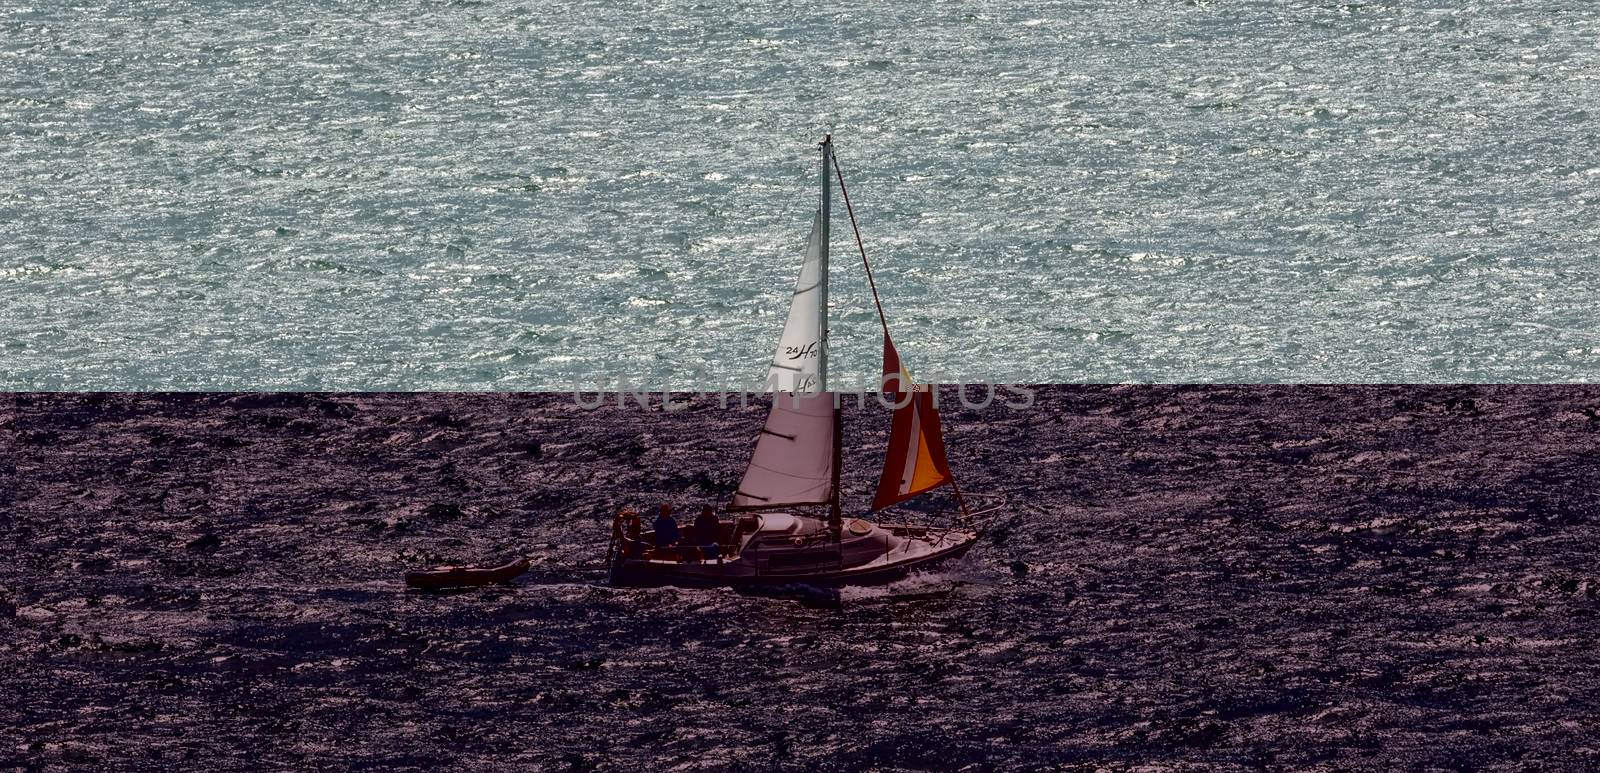 Portland Harbor, UK - July 2, 2020: White sailboat sailing in the harbor. Small rescue boat tagging along.